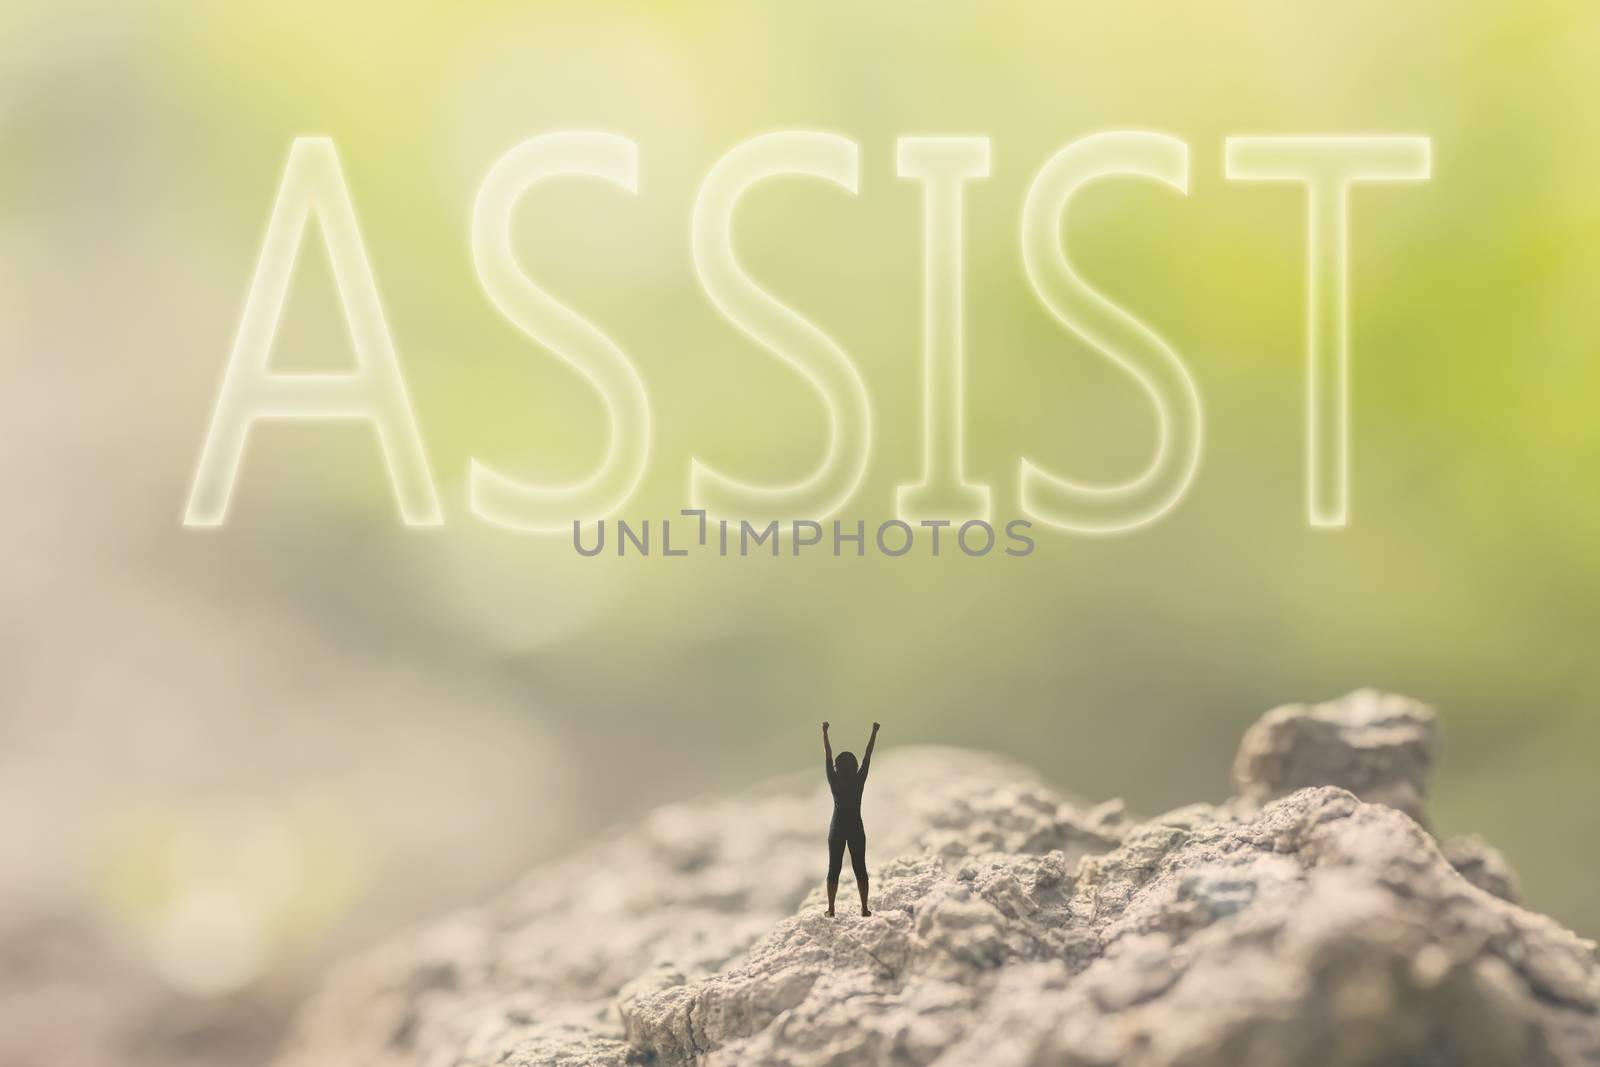 Concept of assist with a person stand in the outdoor and looking up the text over the sky in nature background.